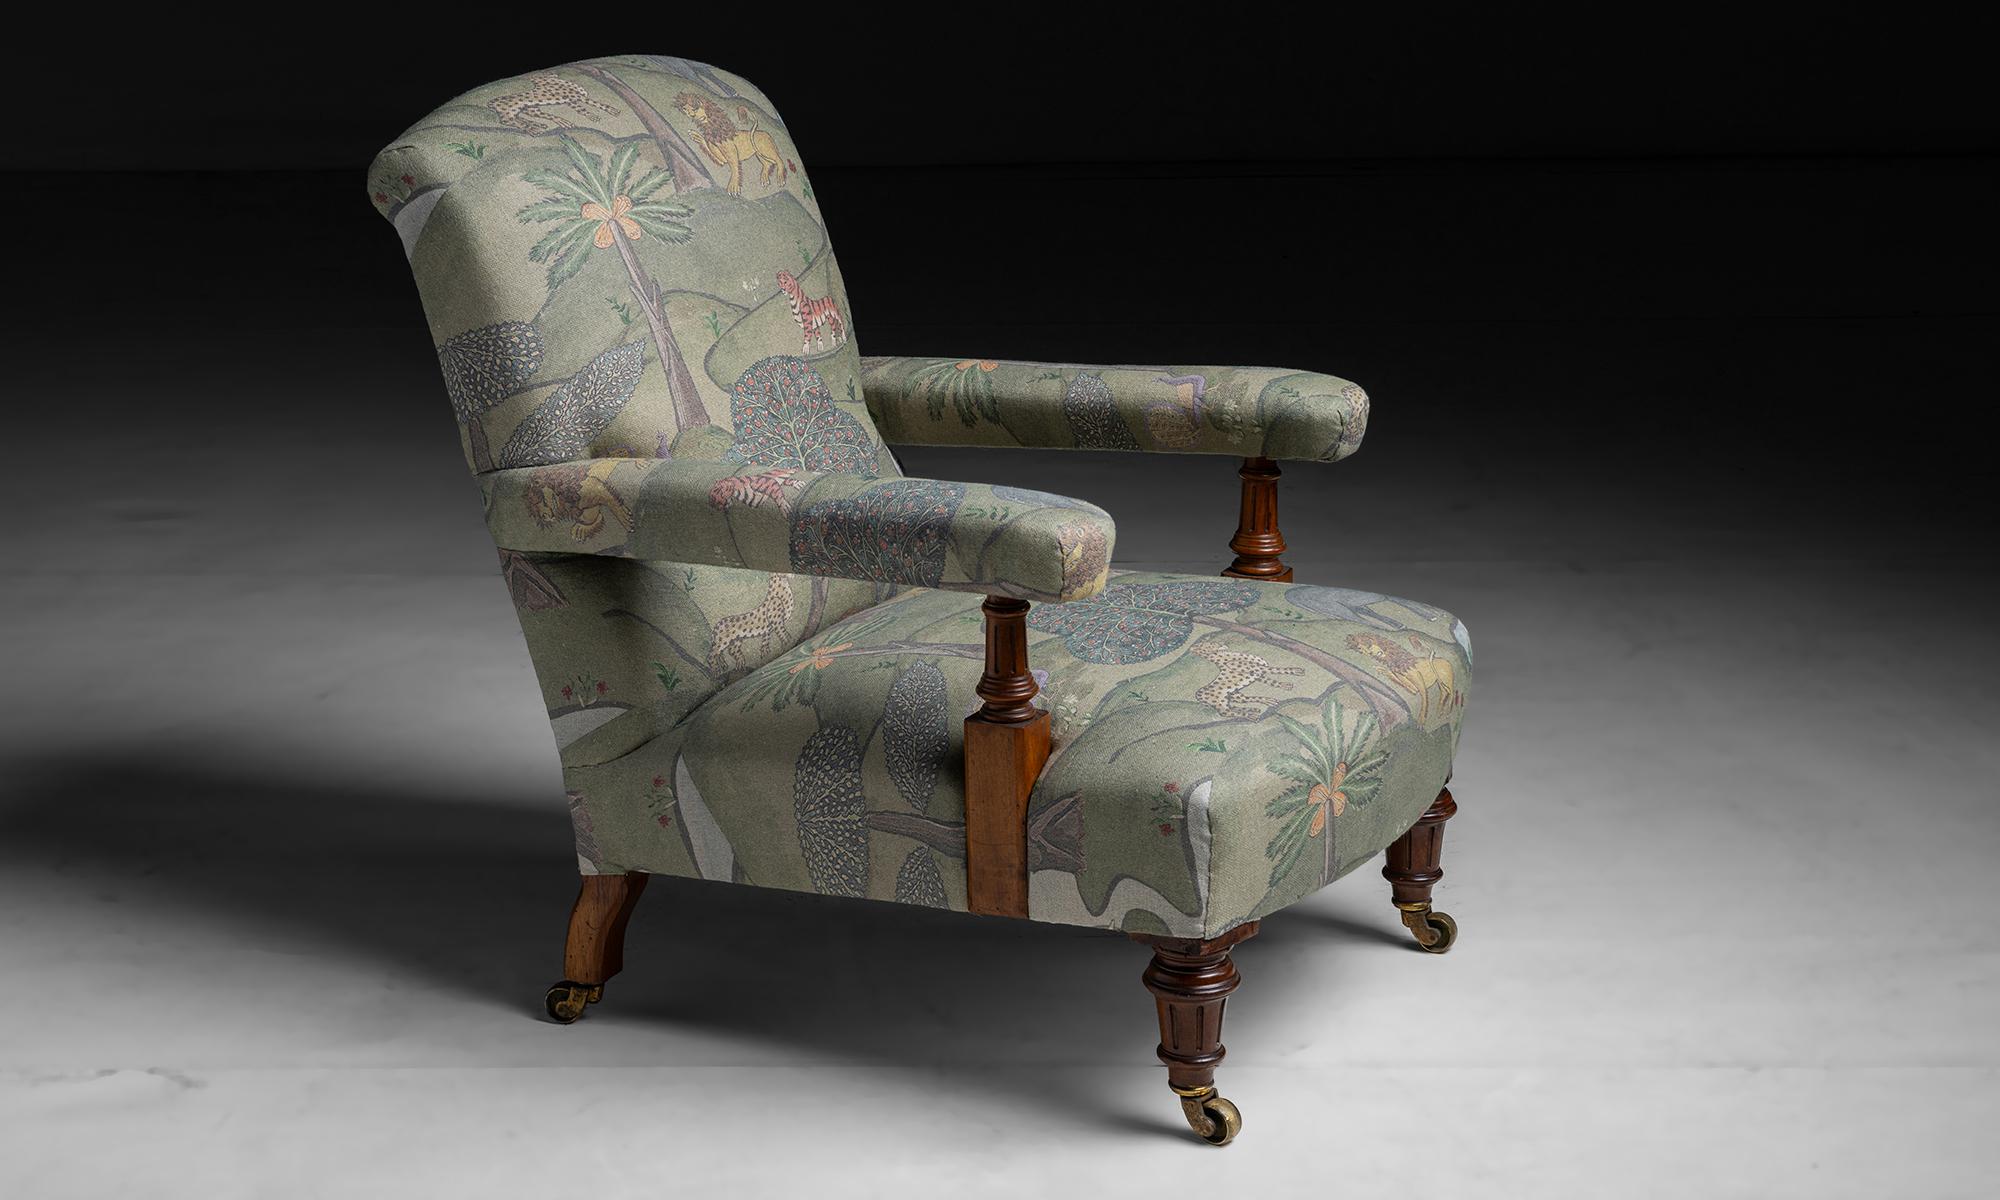 Open Arm Library Chair in linen fabric by James Malone

England circa 1910

Newly upholstered in James Malone 100% linen on antique frame with fluted legs and arm supports.

Measures 26.75”w x 34”d x 33”h x 14”seat